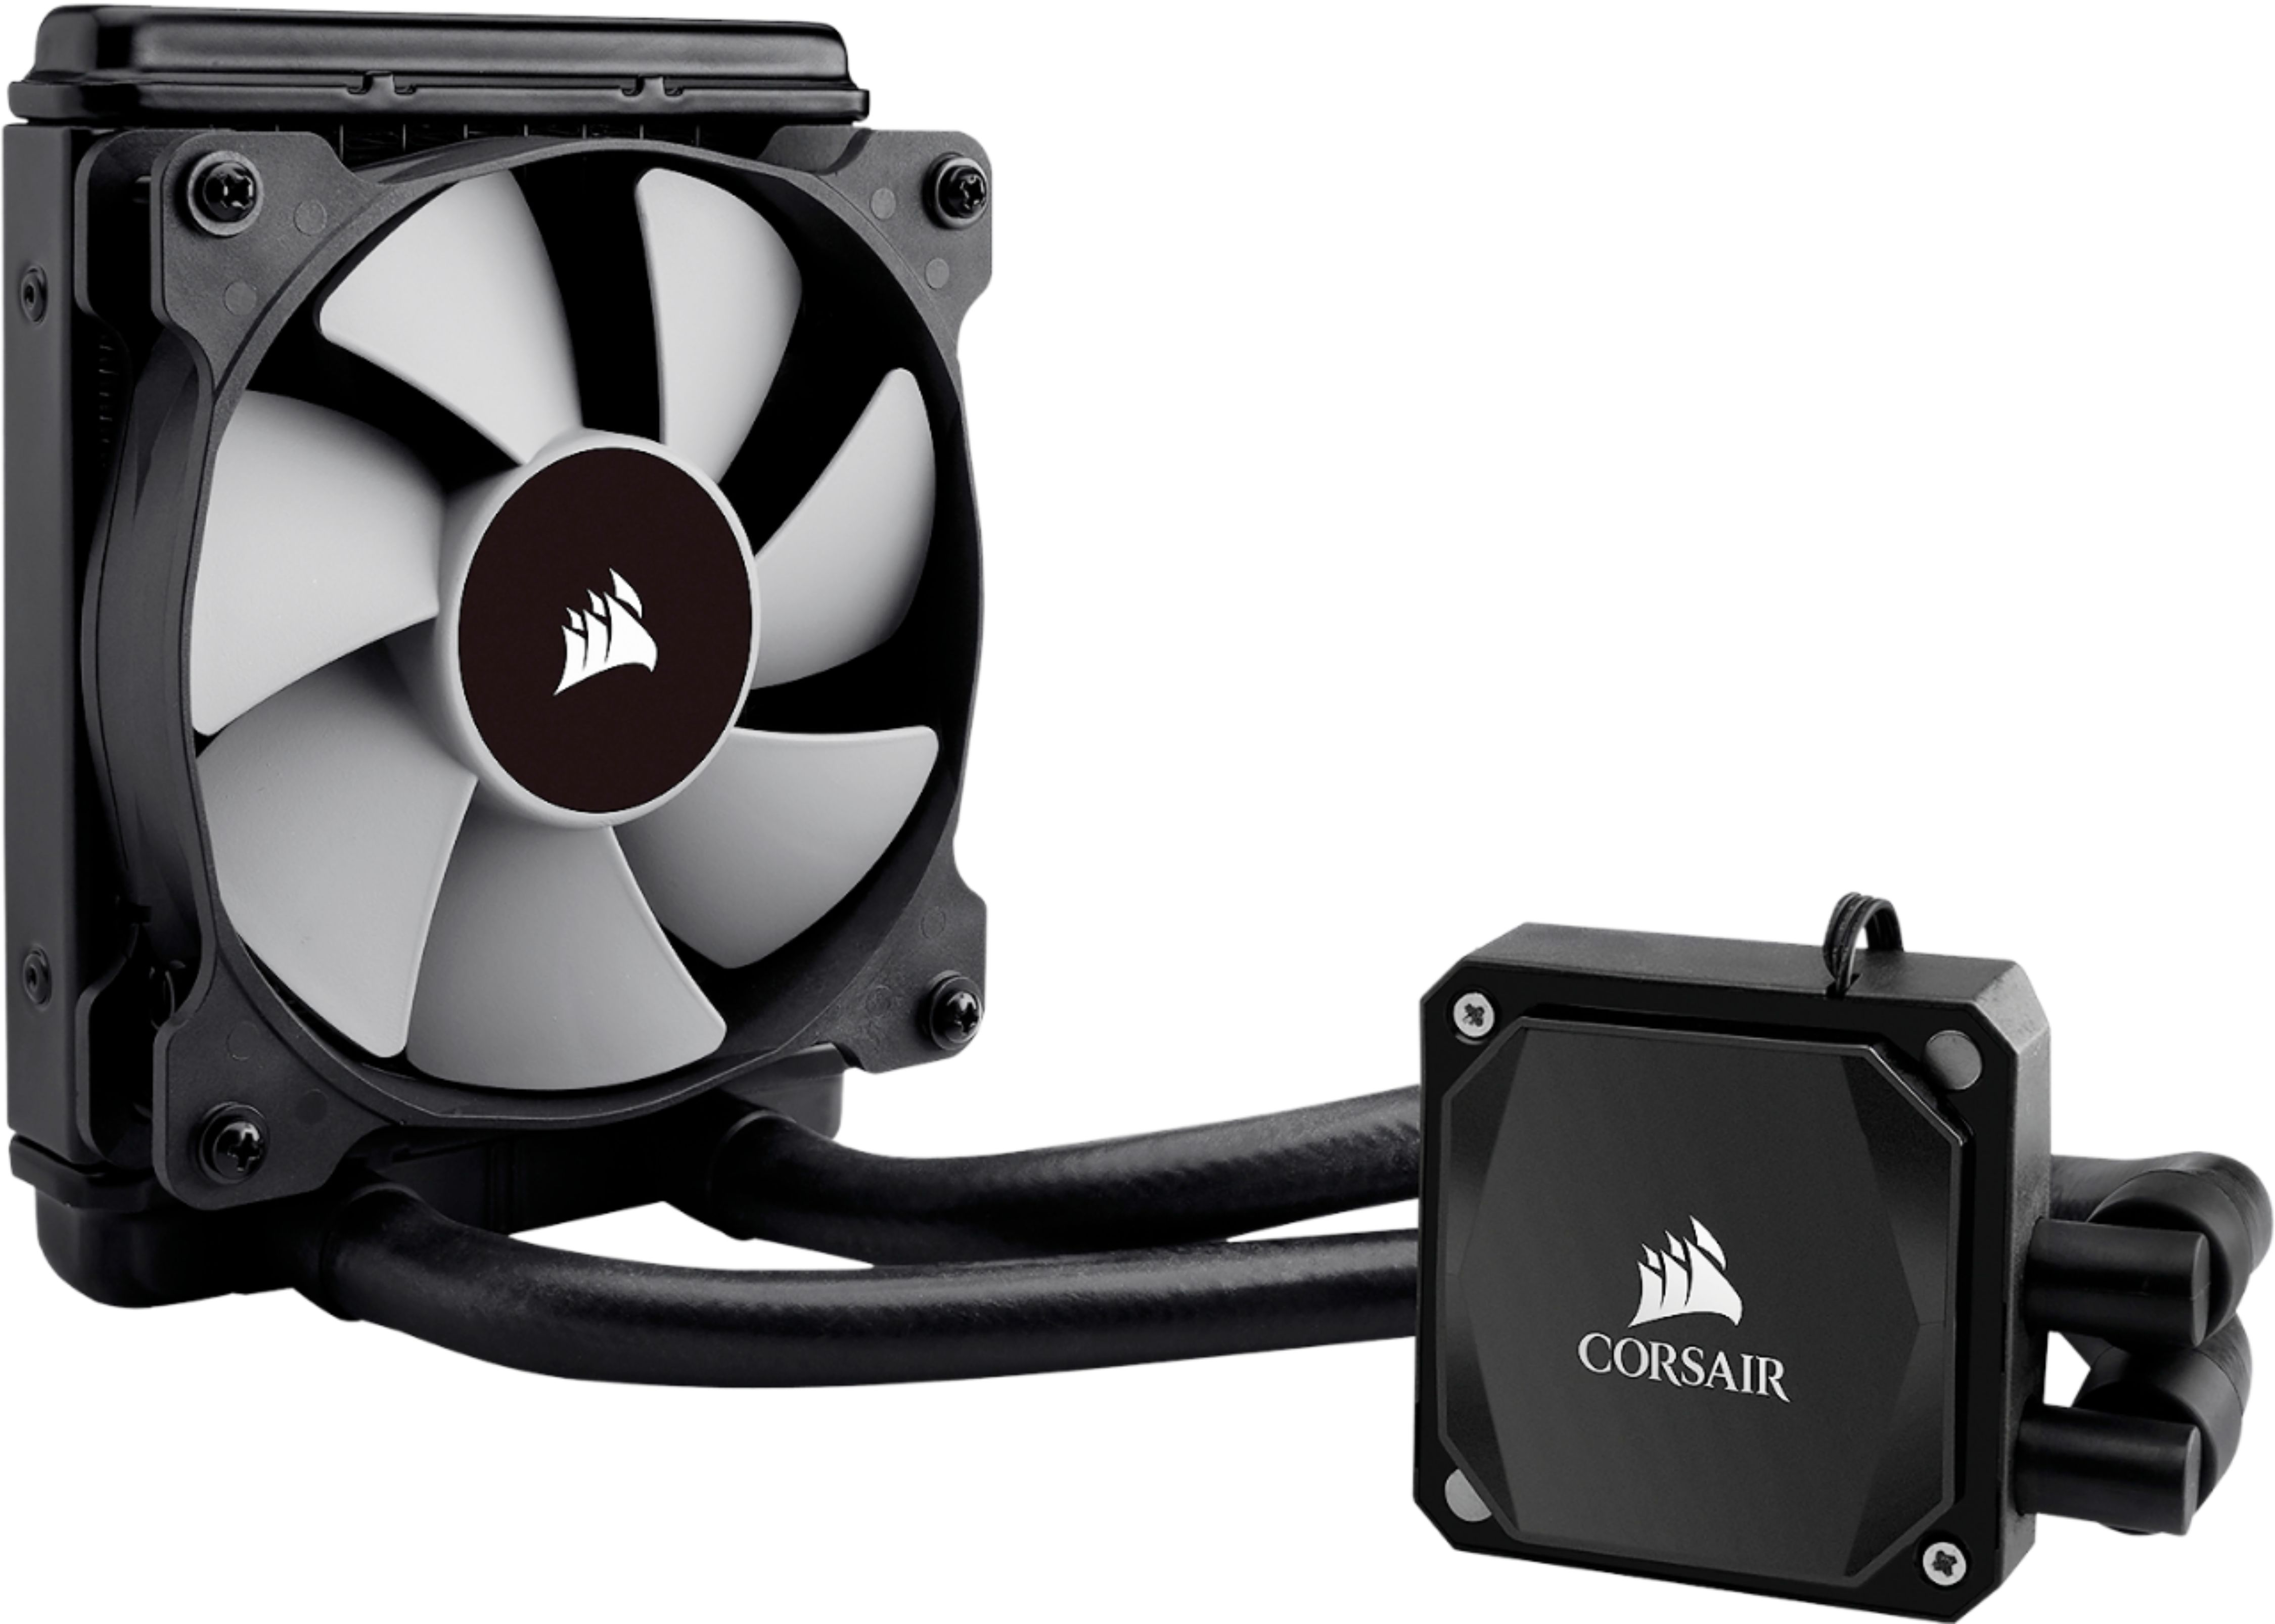 How to Remove Corsair Cpu Cooler: Easy and Effective Steps